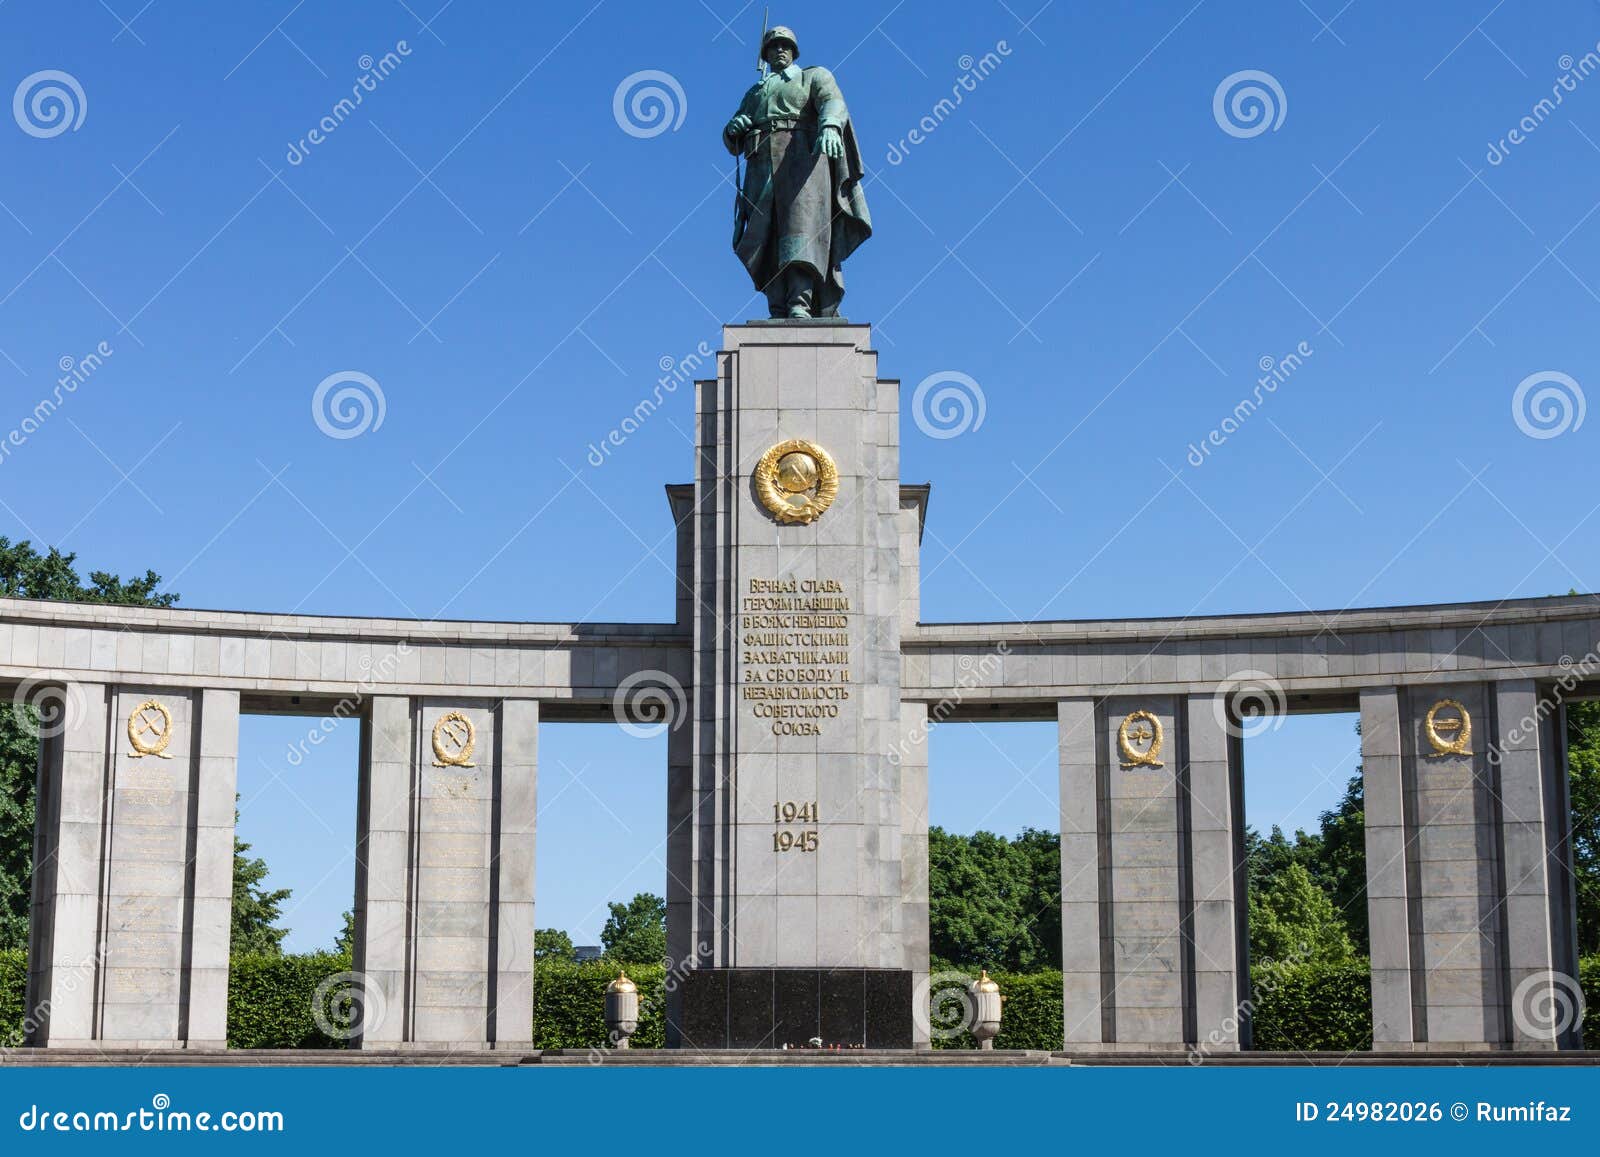 Soviet war monument in Berlin. Monument of the Soviet red army in Berlin remembering World War II